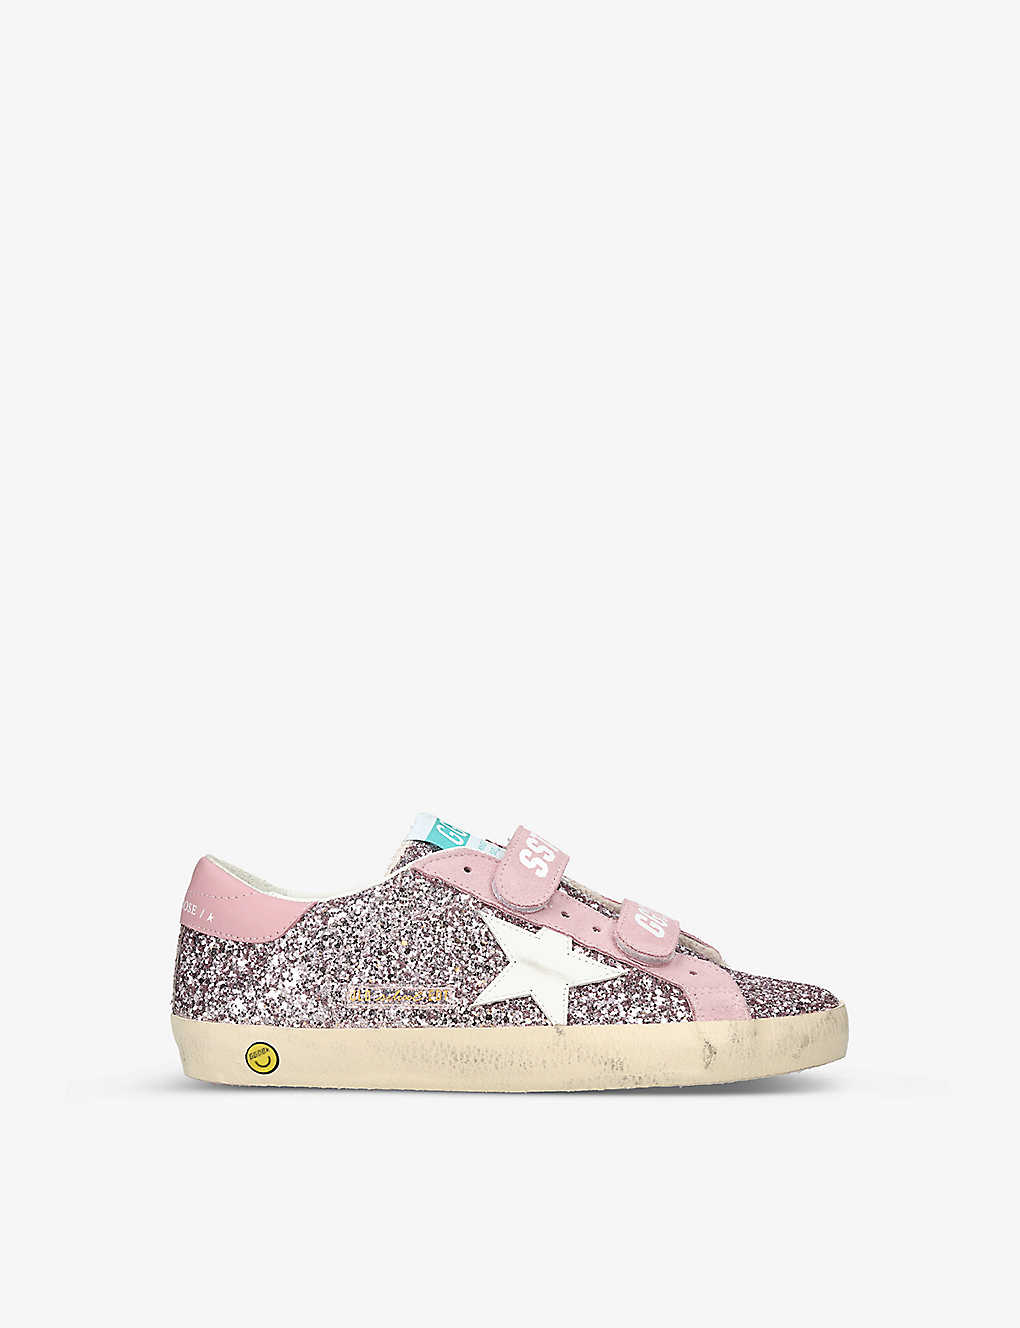 Golden Goose Girls Pink Kids Old Skool Glitter Leather Low-top Trainers 9-10 Years